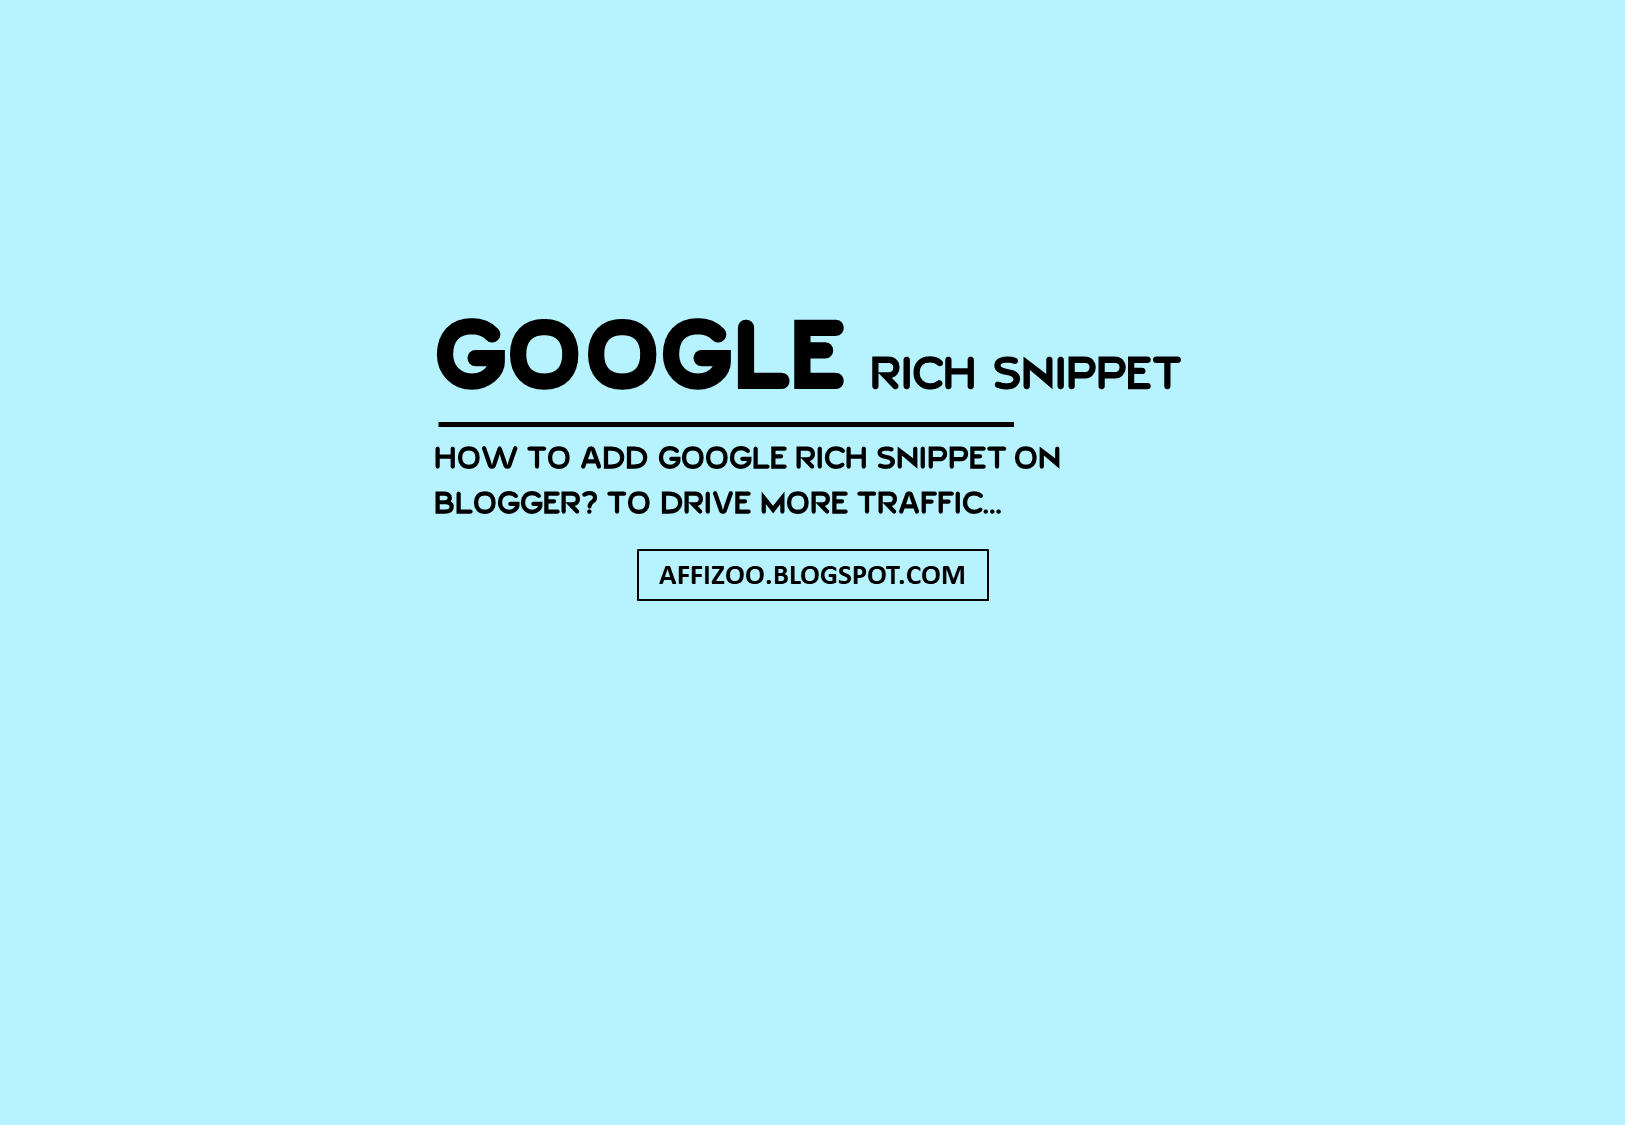 How To Add Google Rich Snippet In Blogger | Drive More Traffic